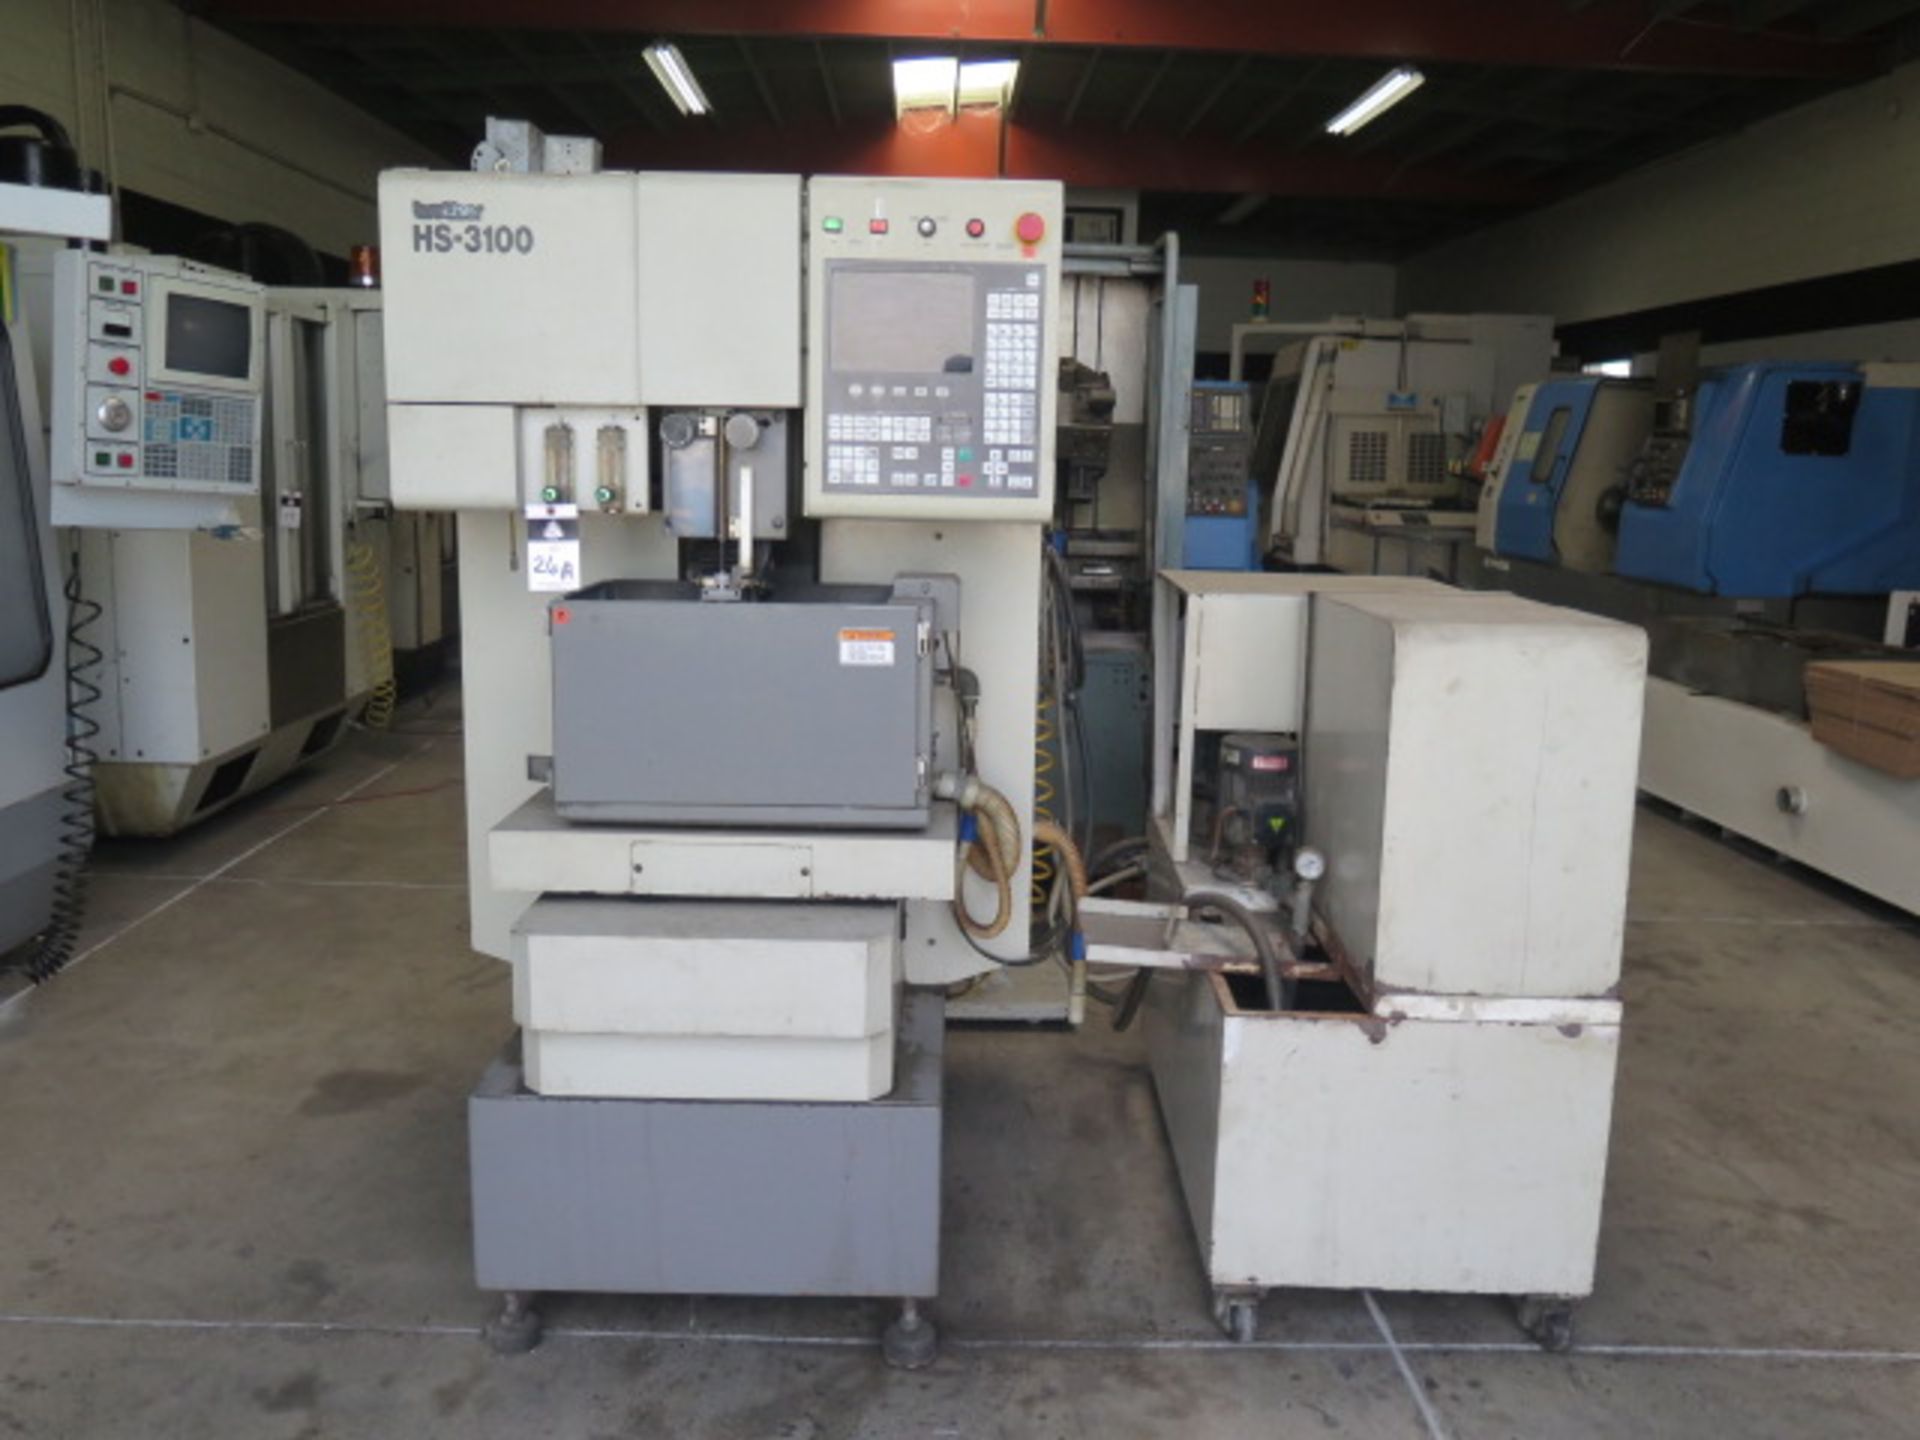 Brother HS-3100 CNC Wire EDM s/n 111120 w/ Brother CNC Controls, 8 3/4" x 11" Work Area, SOLD AS IS